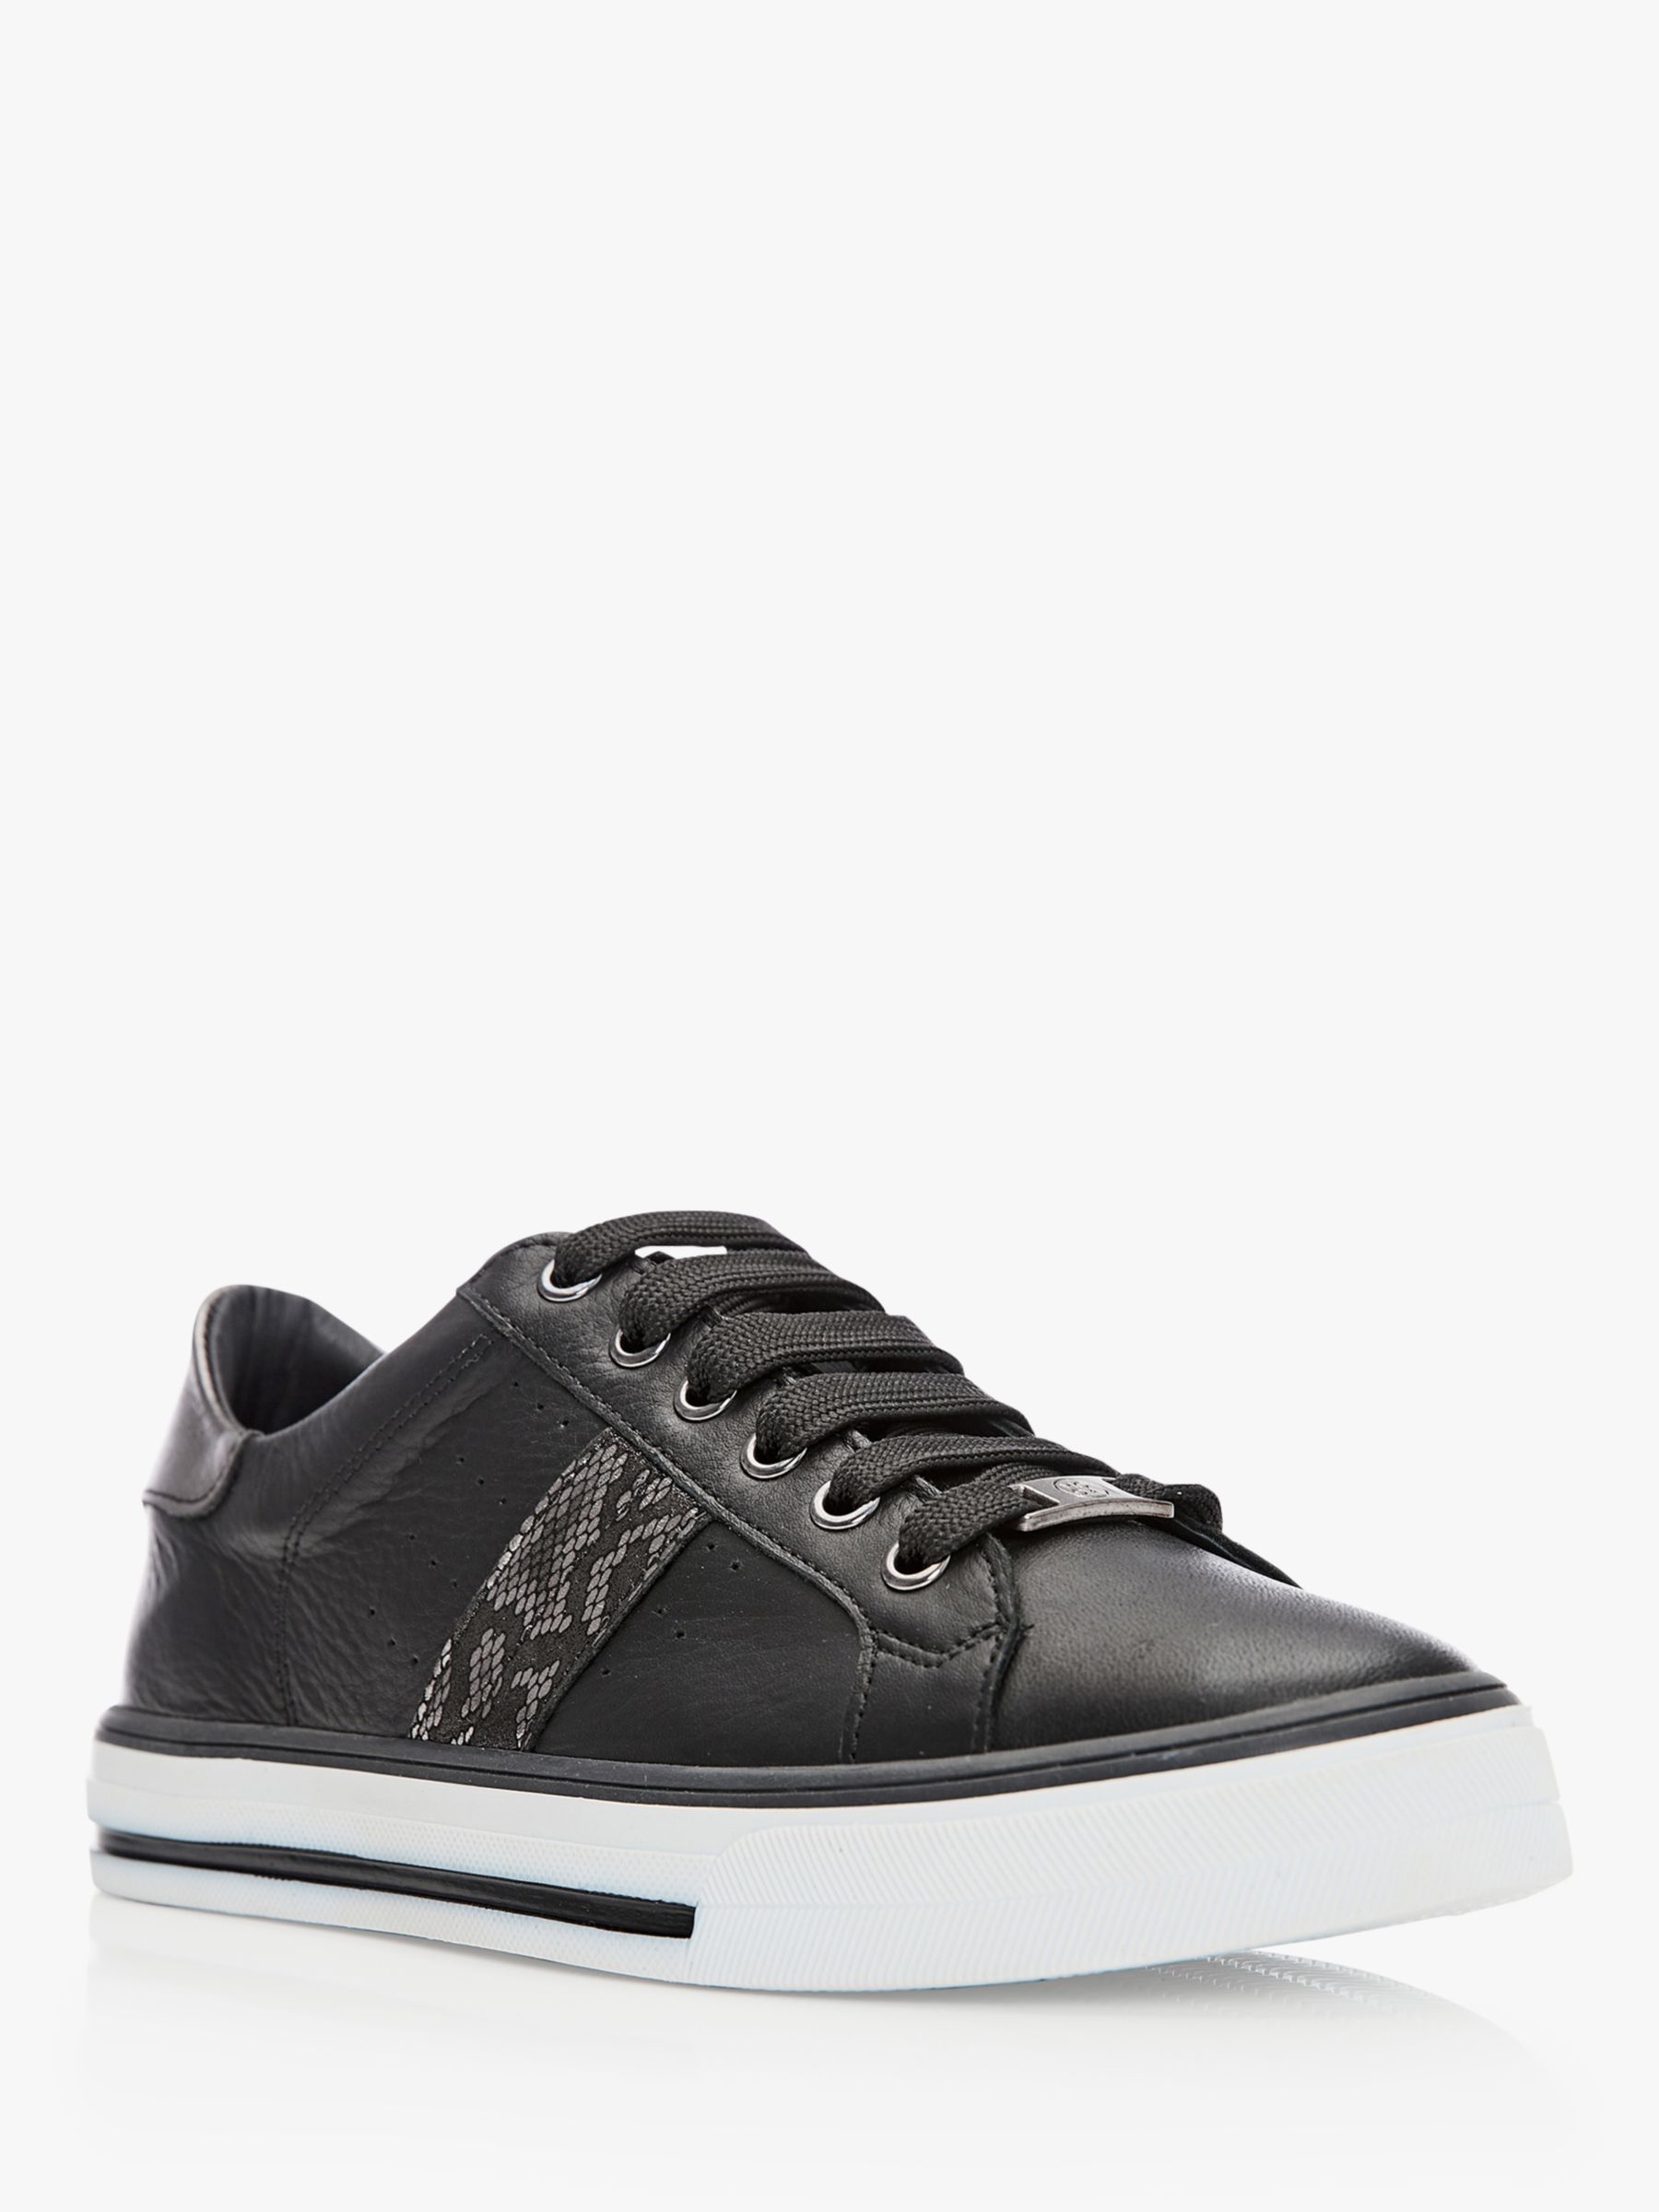 Buy Moda in Pelle Alberry Leather Lace Up Trainers Online at johnlewis.com